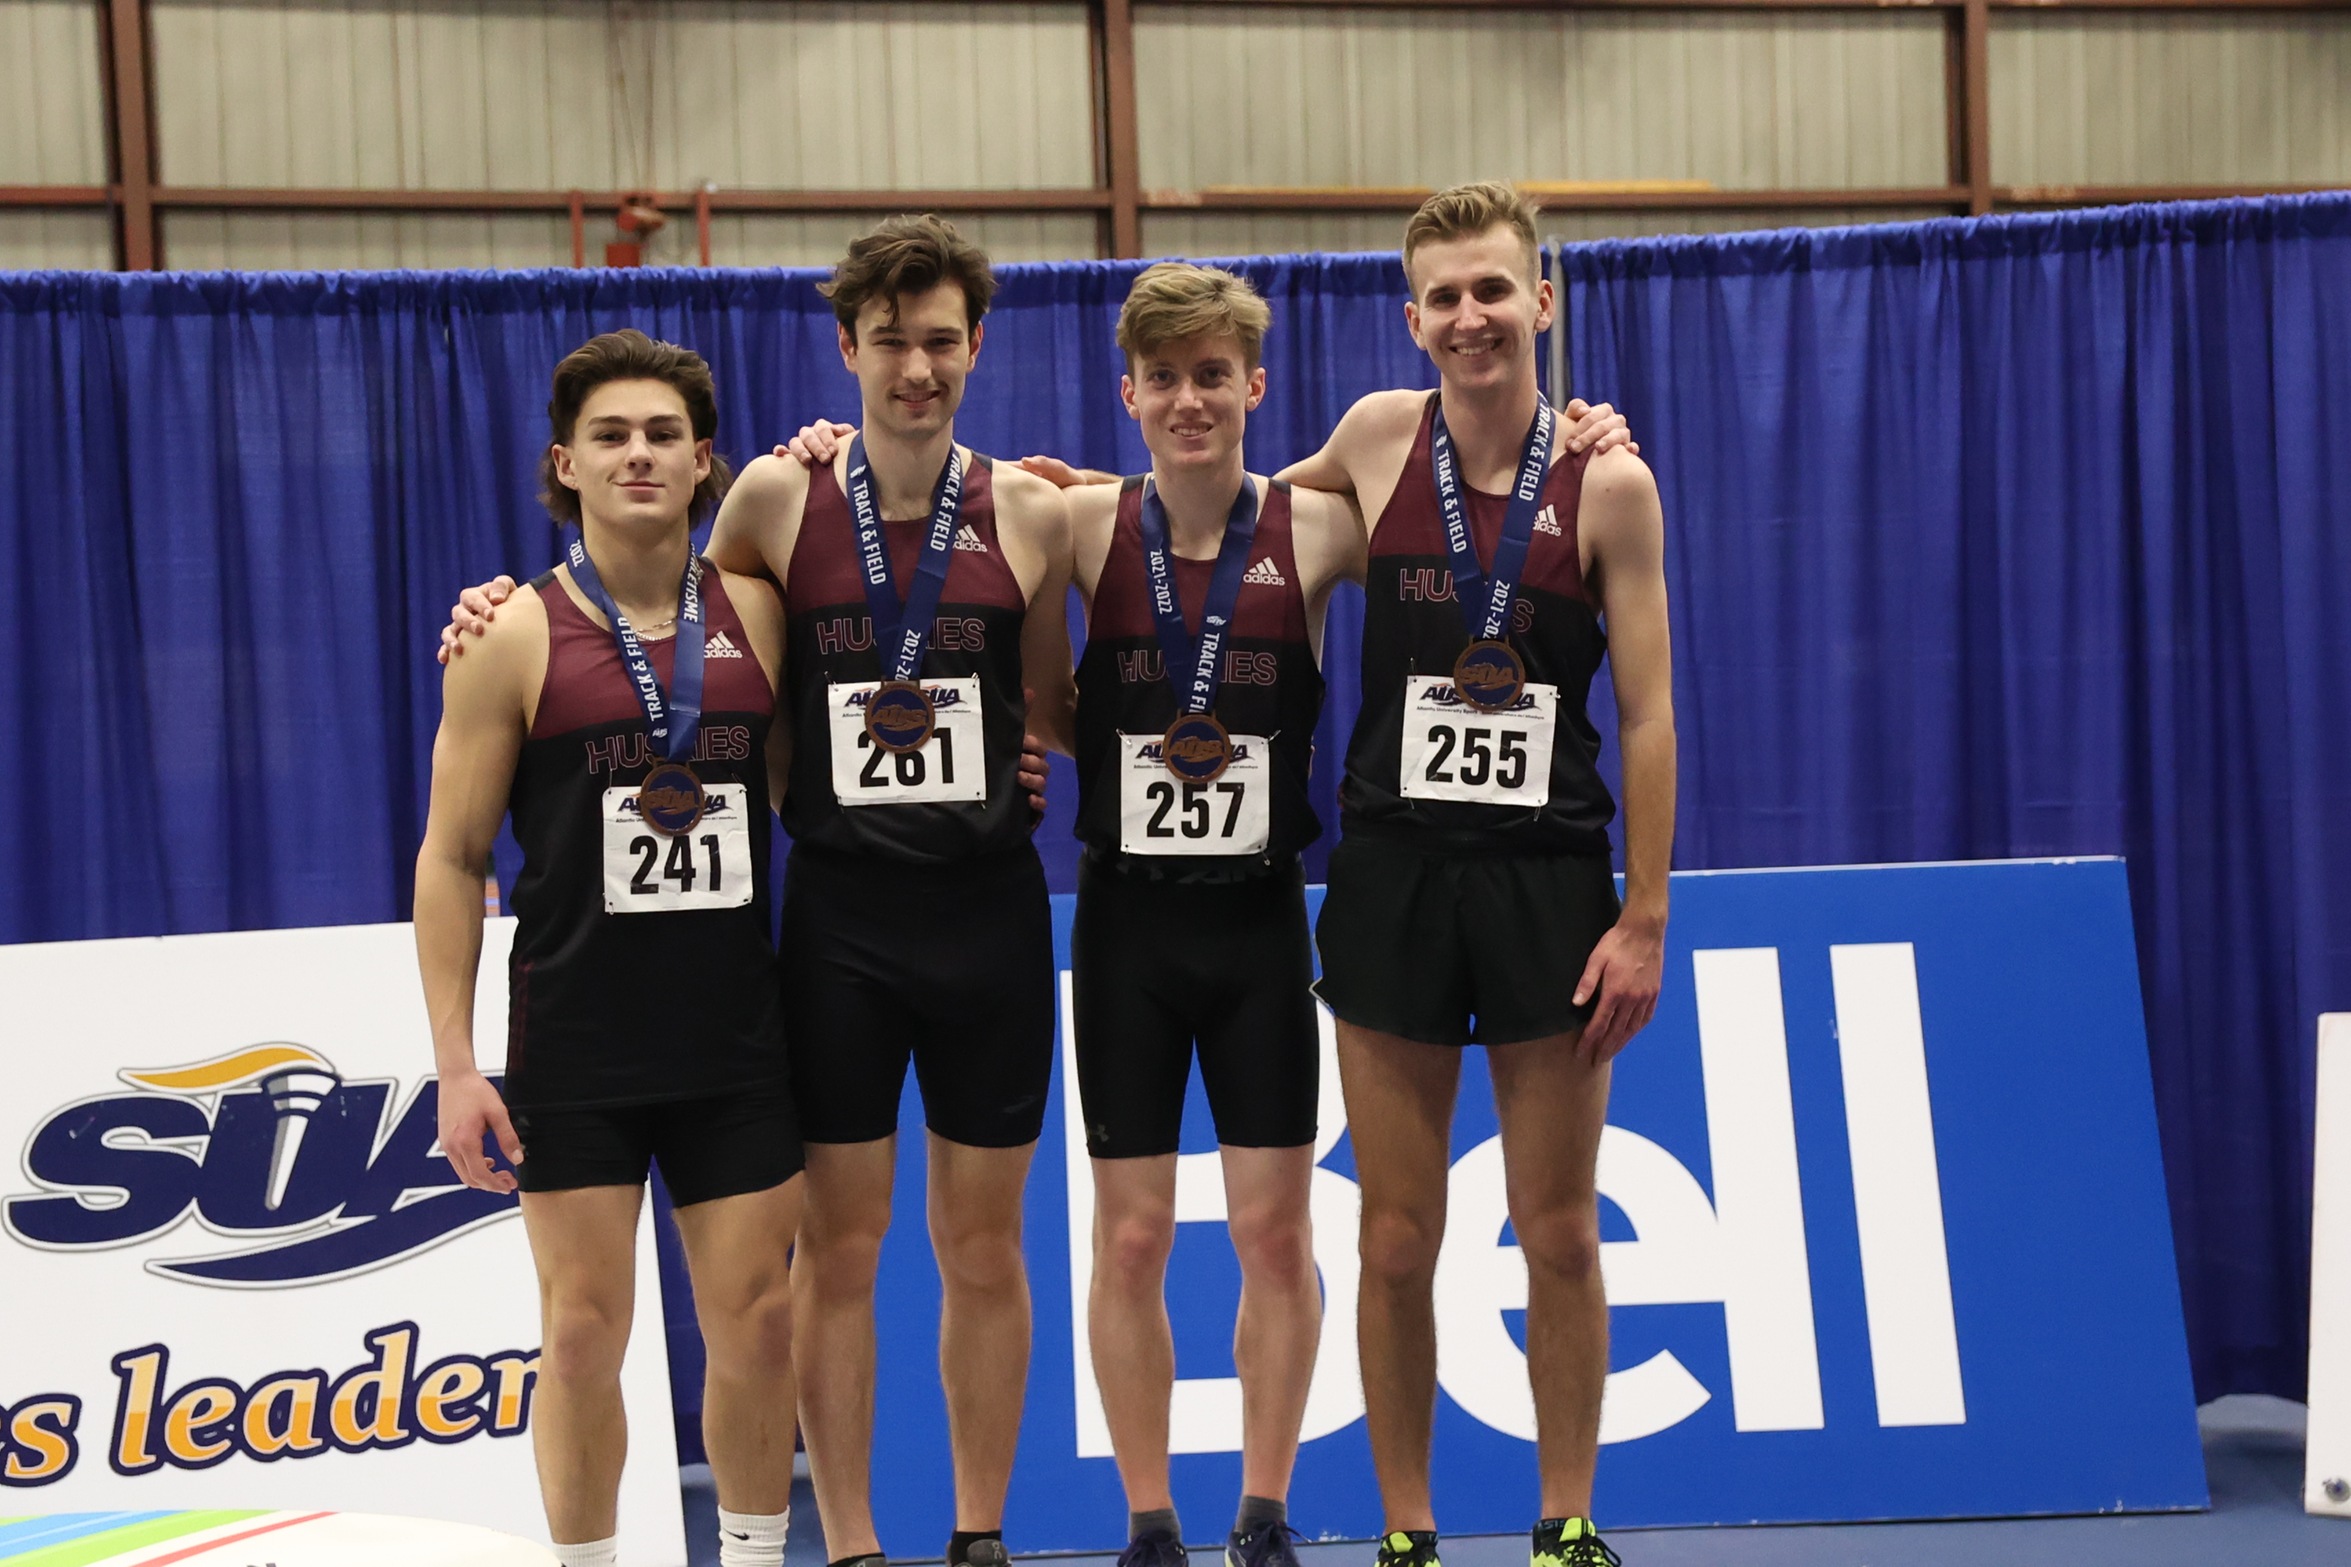 The Huskies 4x800m relay team (Colton Caballero, Joe Stewart, Andrew Peverill, Rory McGarvey) claimed bronze at the 2021-22 AUS Track & Field Championships in Moncton on March 18, 2022.